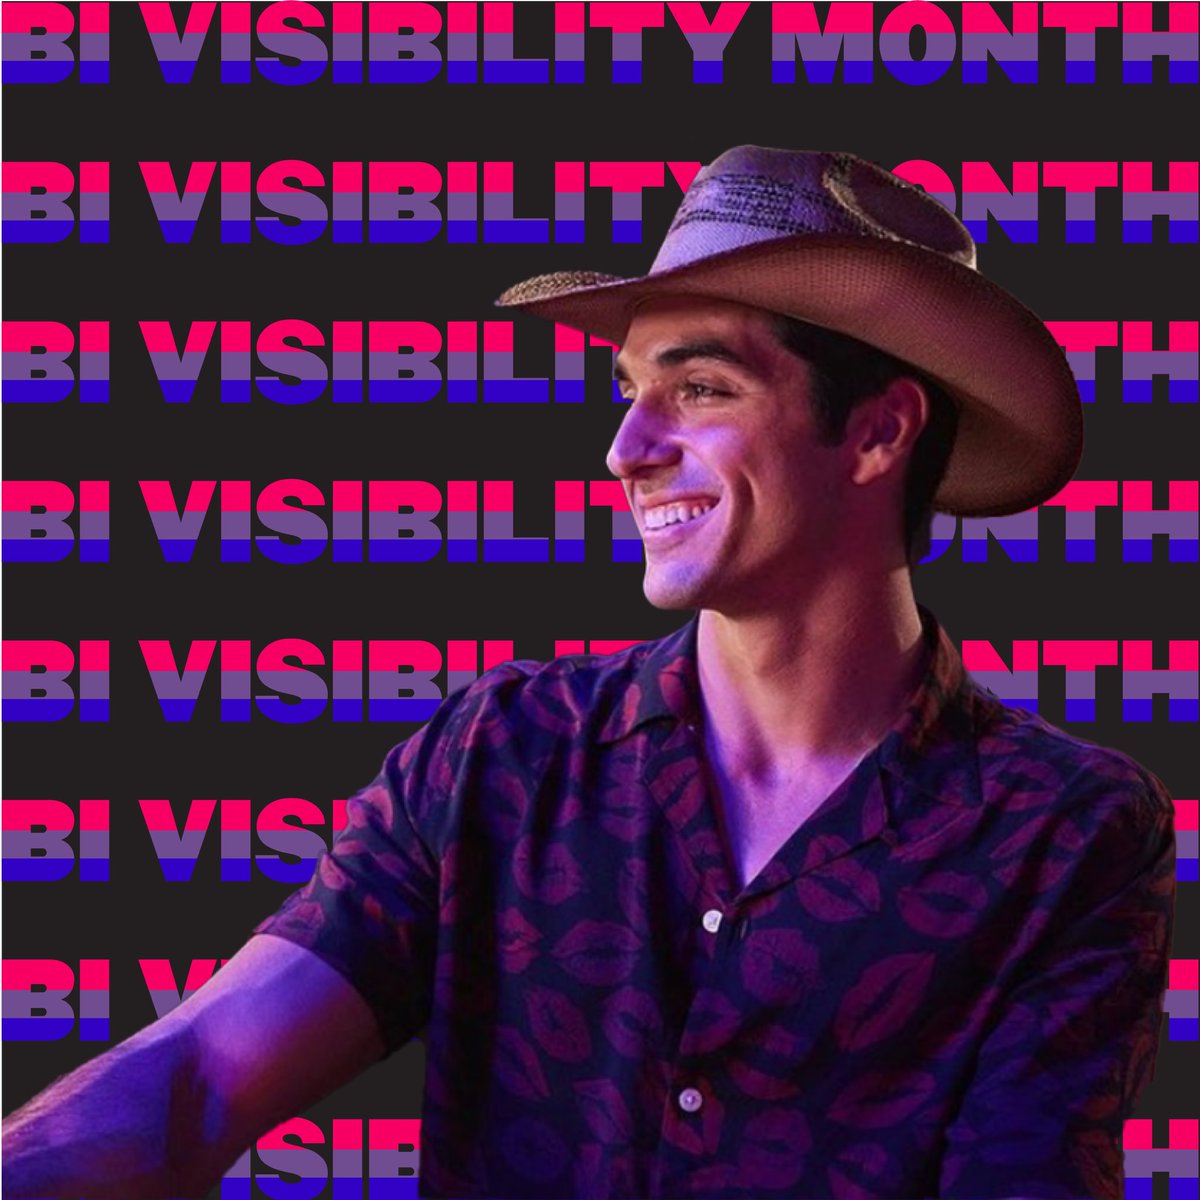 happy #bivisibilityday 🩷💜💙

acd was the first character i’ve ever seen myself wholly in, so i’ll leave this post with the line that hit many of us like a truck: 

“straight people, he thinks, probably don’t spend this much time convincing themselves they’re straight”